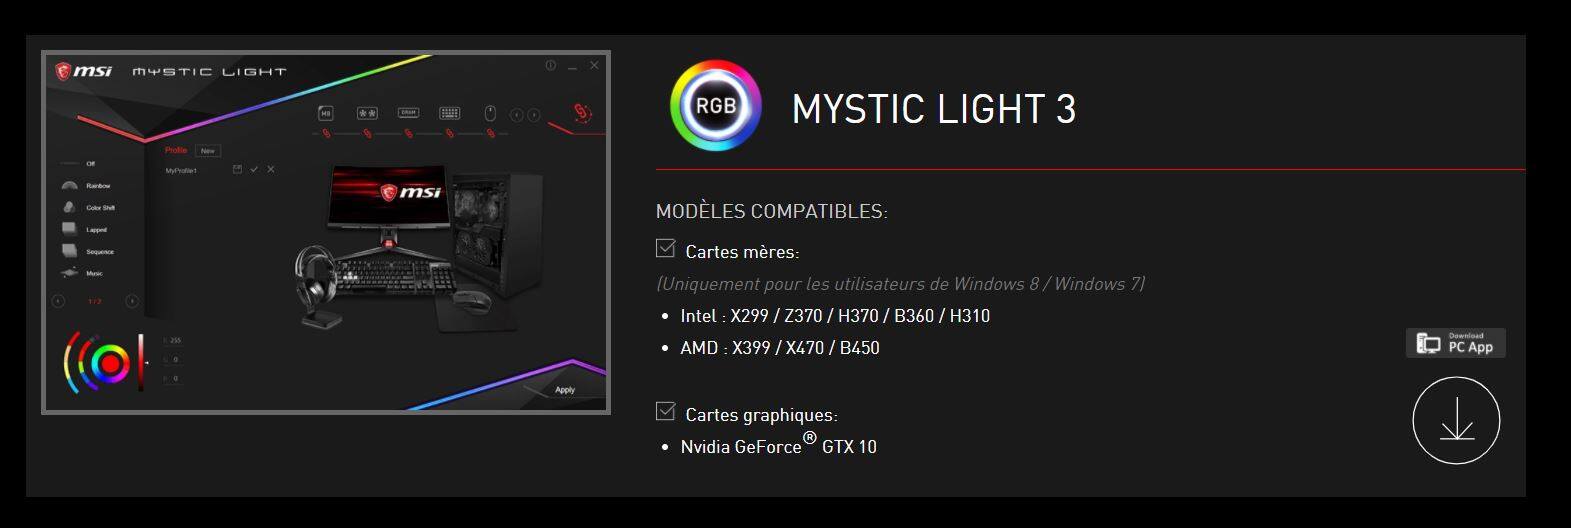 Mystic Light does not appear Dragon - Programs, Apps and Websites - Linus Tech Tips